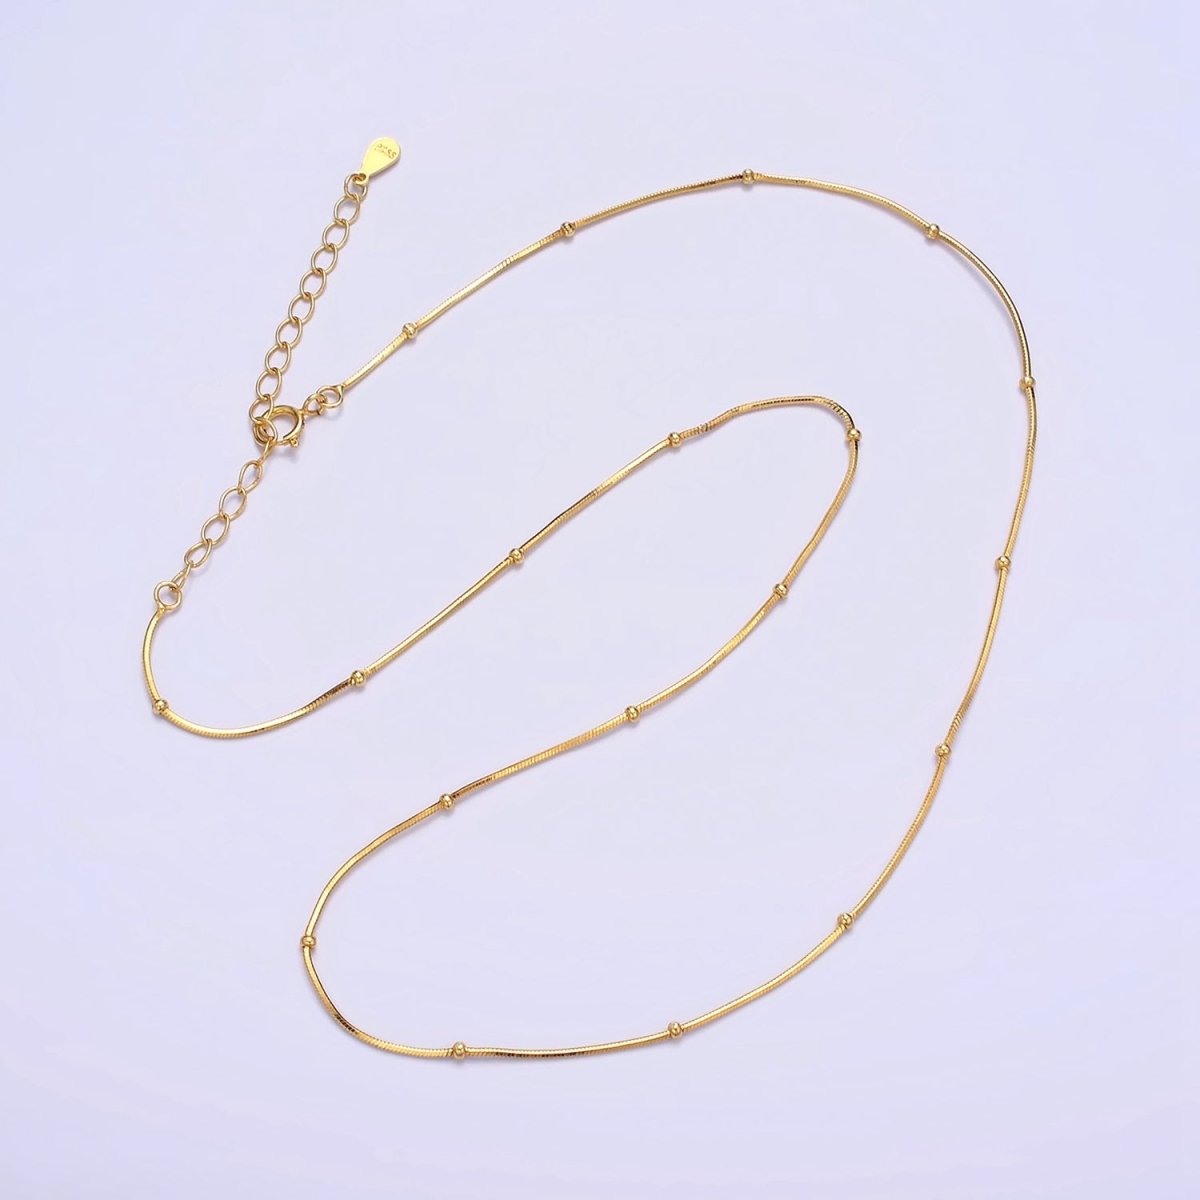 Dainty 24K Gold Vermeil Satellite Chain Necklace 925 Sterling Silver Snake Necklace Chain w/ Heavy 24K Gold Plated 15.35 inch + 2 inch extender | WA-1983 Clearance Pricing - DLUXCA